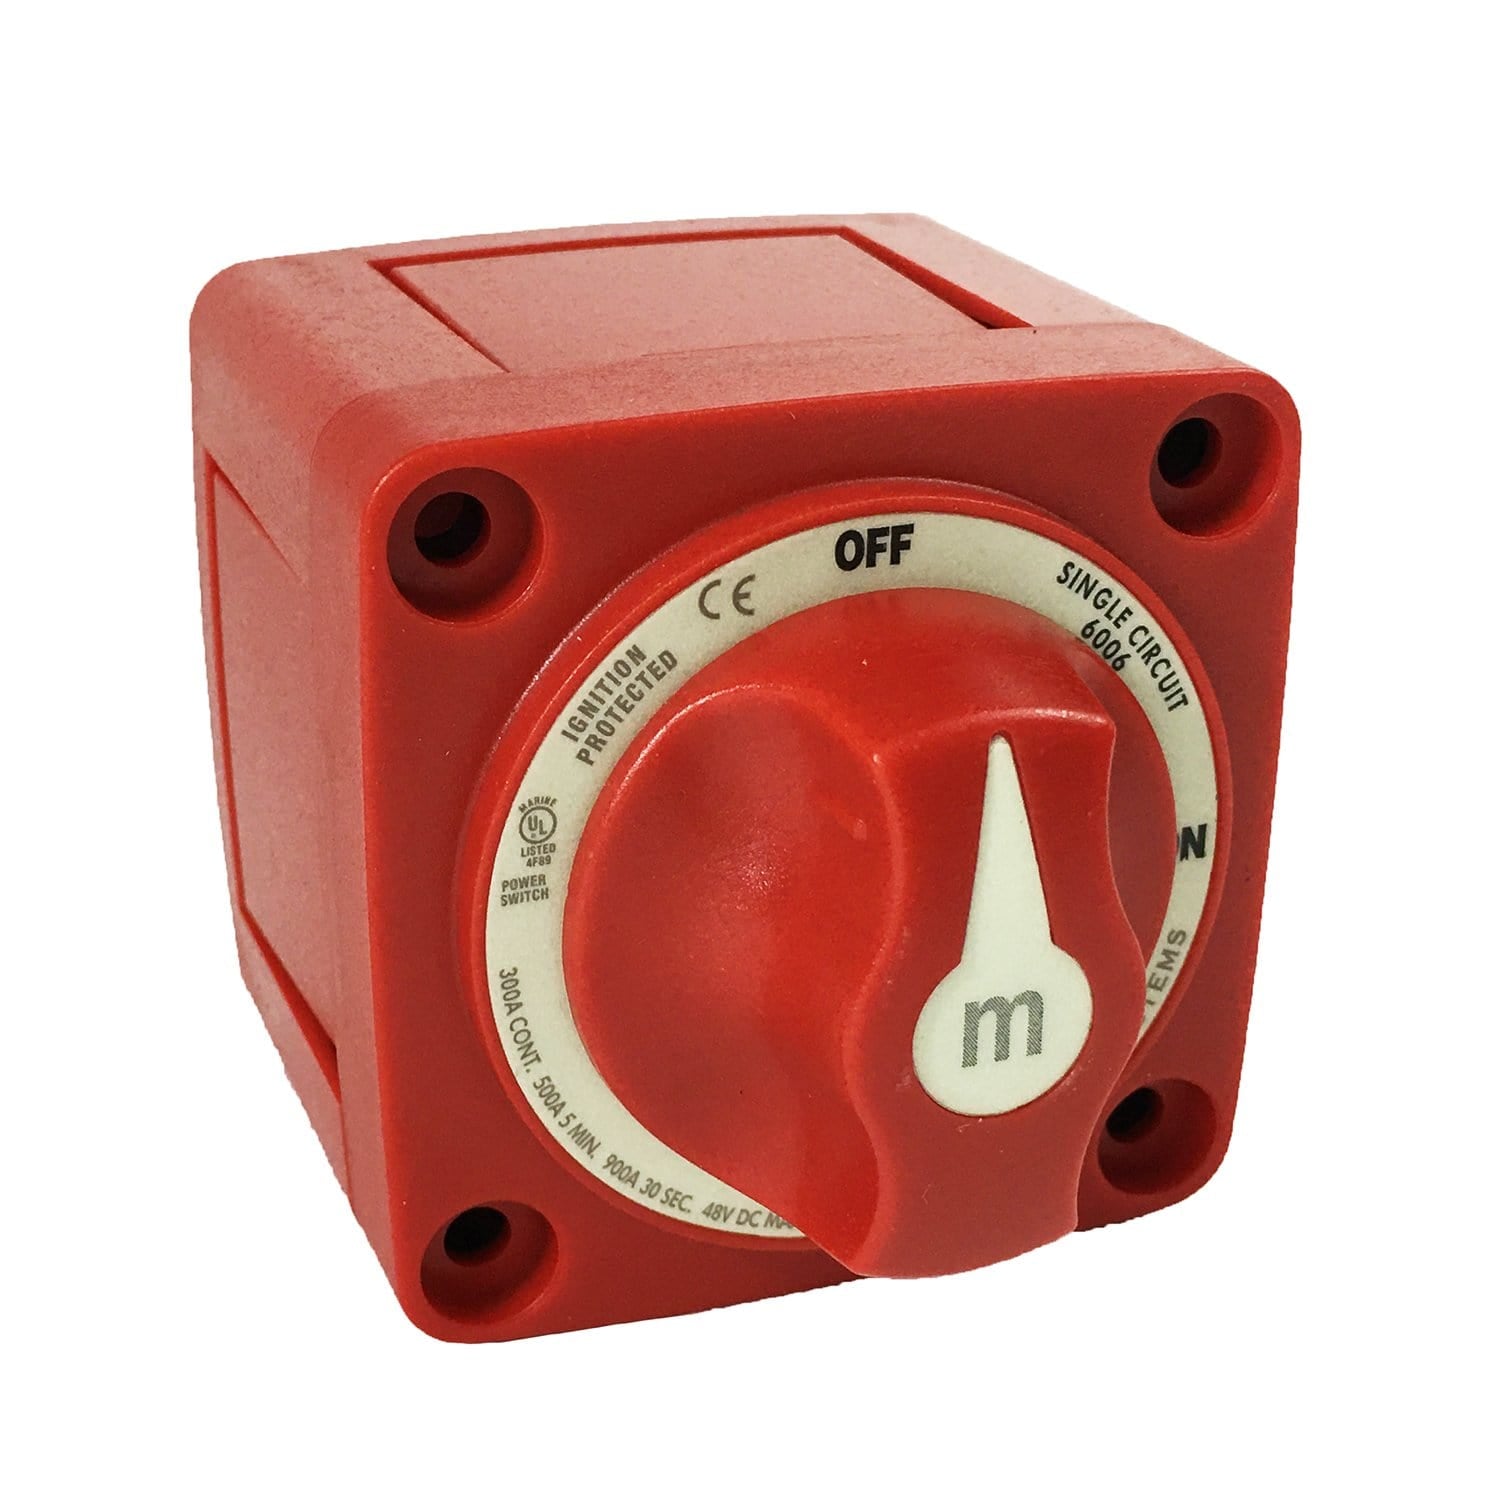 Blue Sea Systems 6006-BSS Power Products Mini Battery Switch M Series W/ Knob, Red